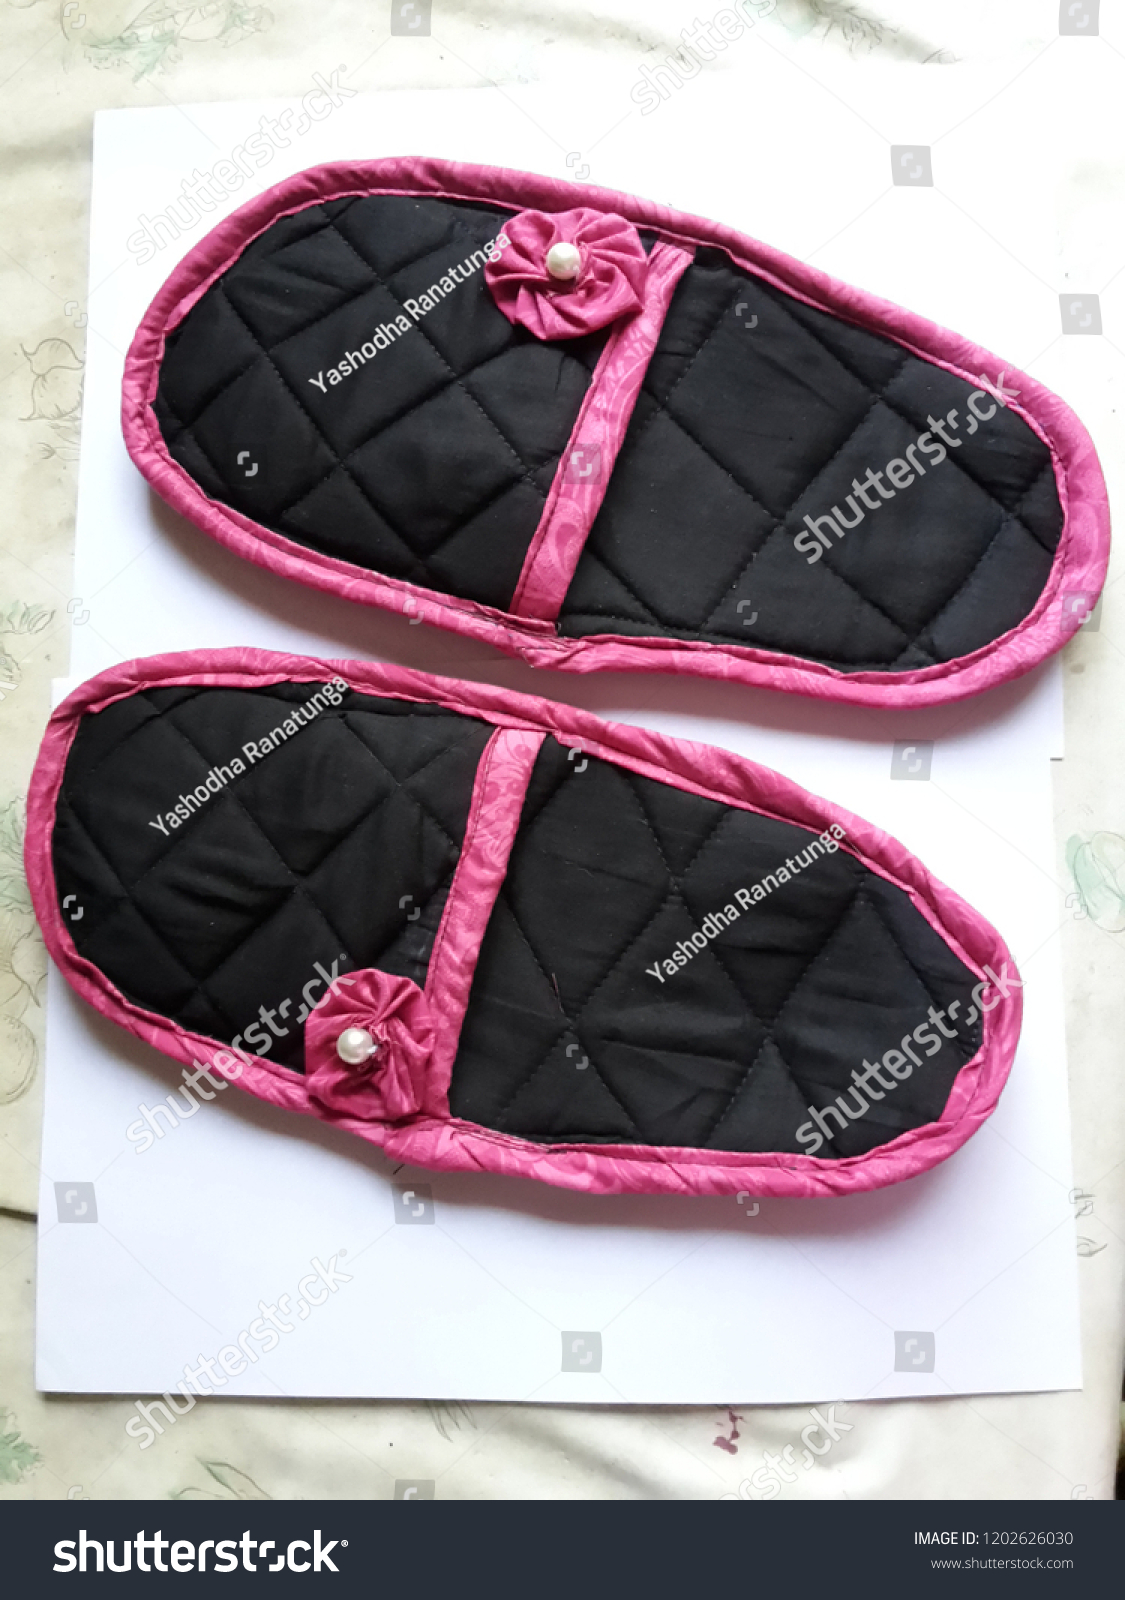 slippers made of cloth